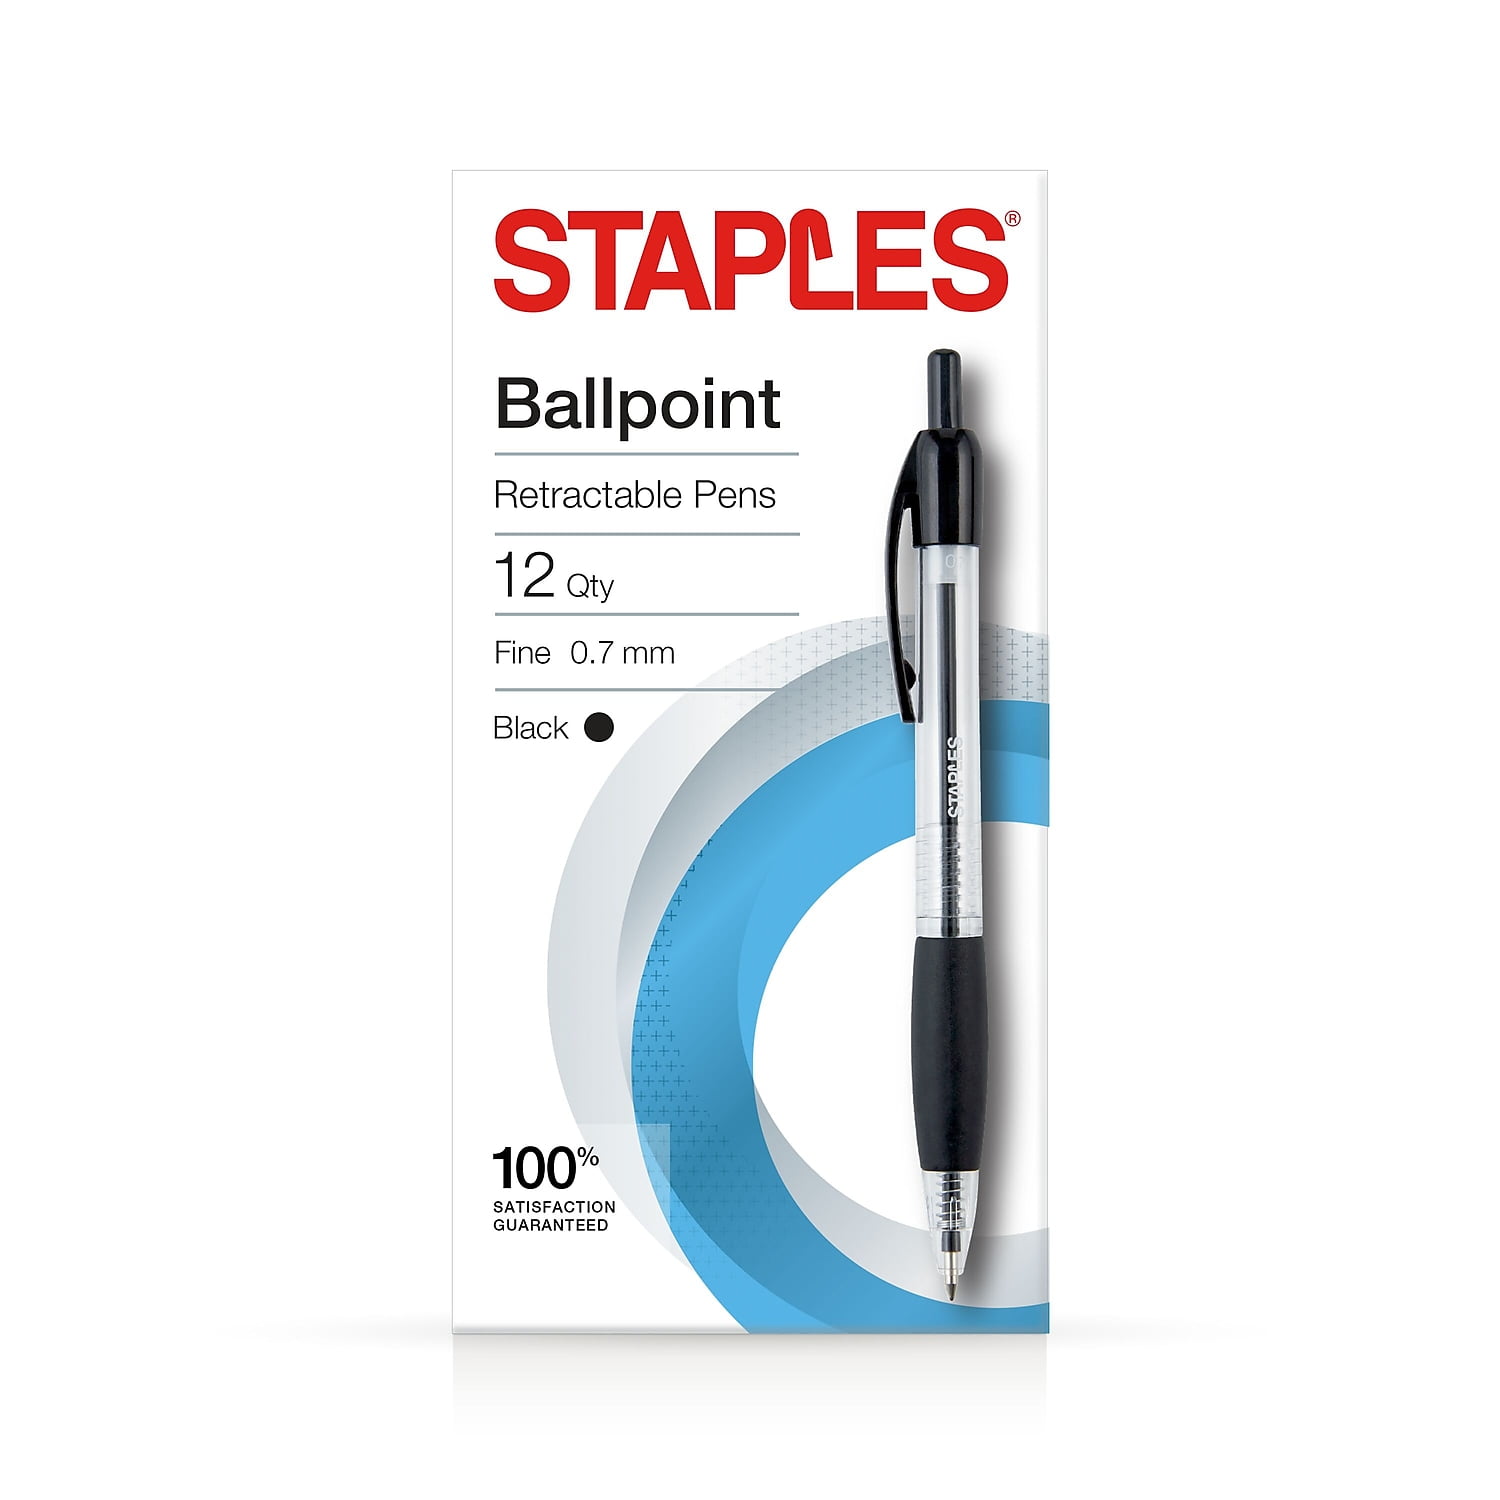 Headed to Staples? Score 18 Erasers AND 5 Pens for Just $3